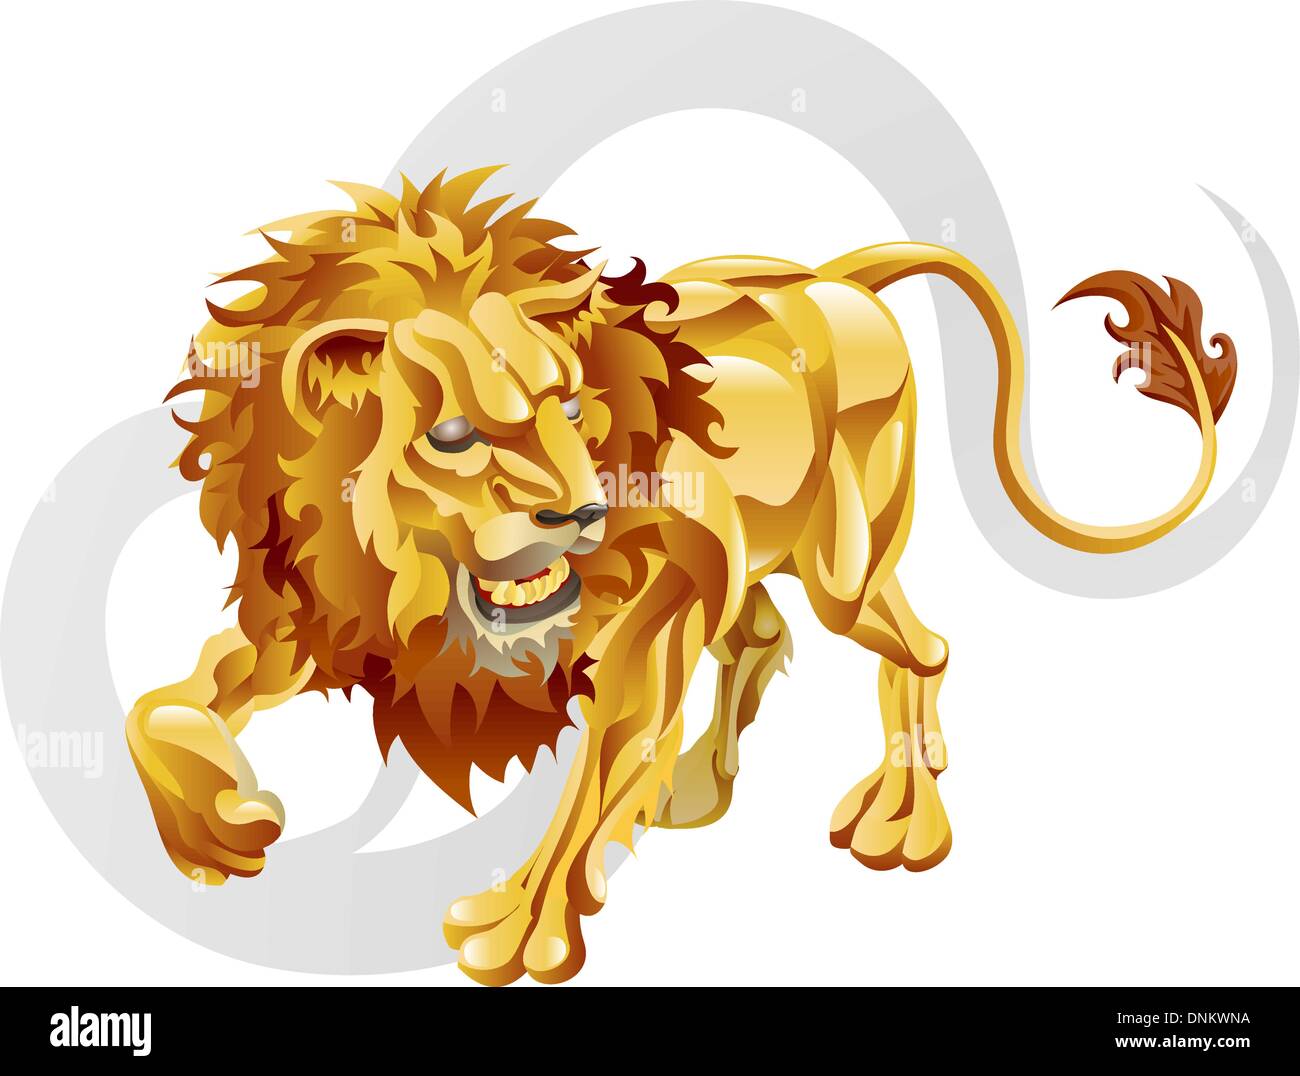 Illustration representing Leo the lion star or birth sign. Includes the symbol or icon in the background Stock Vector